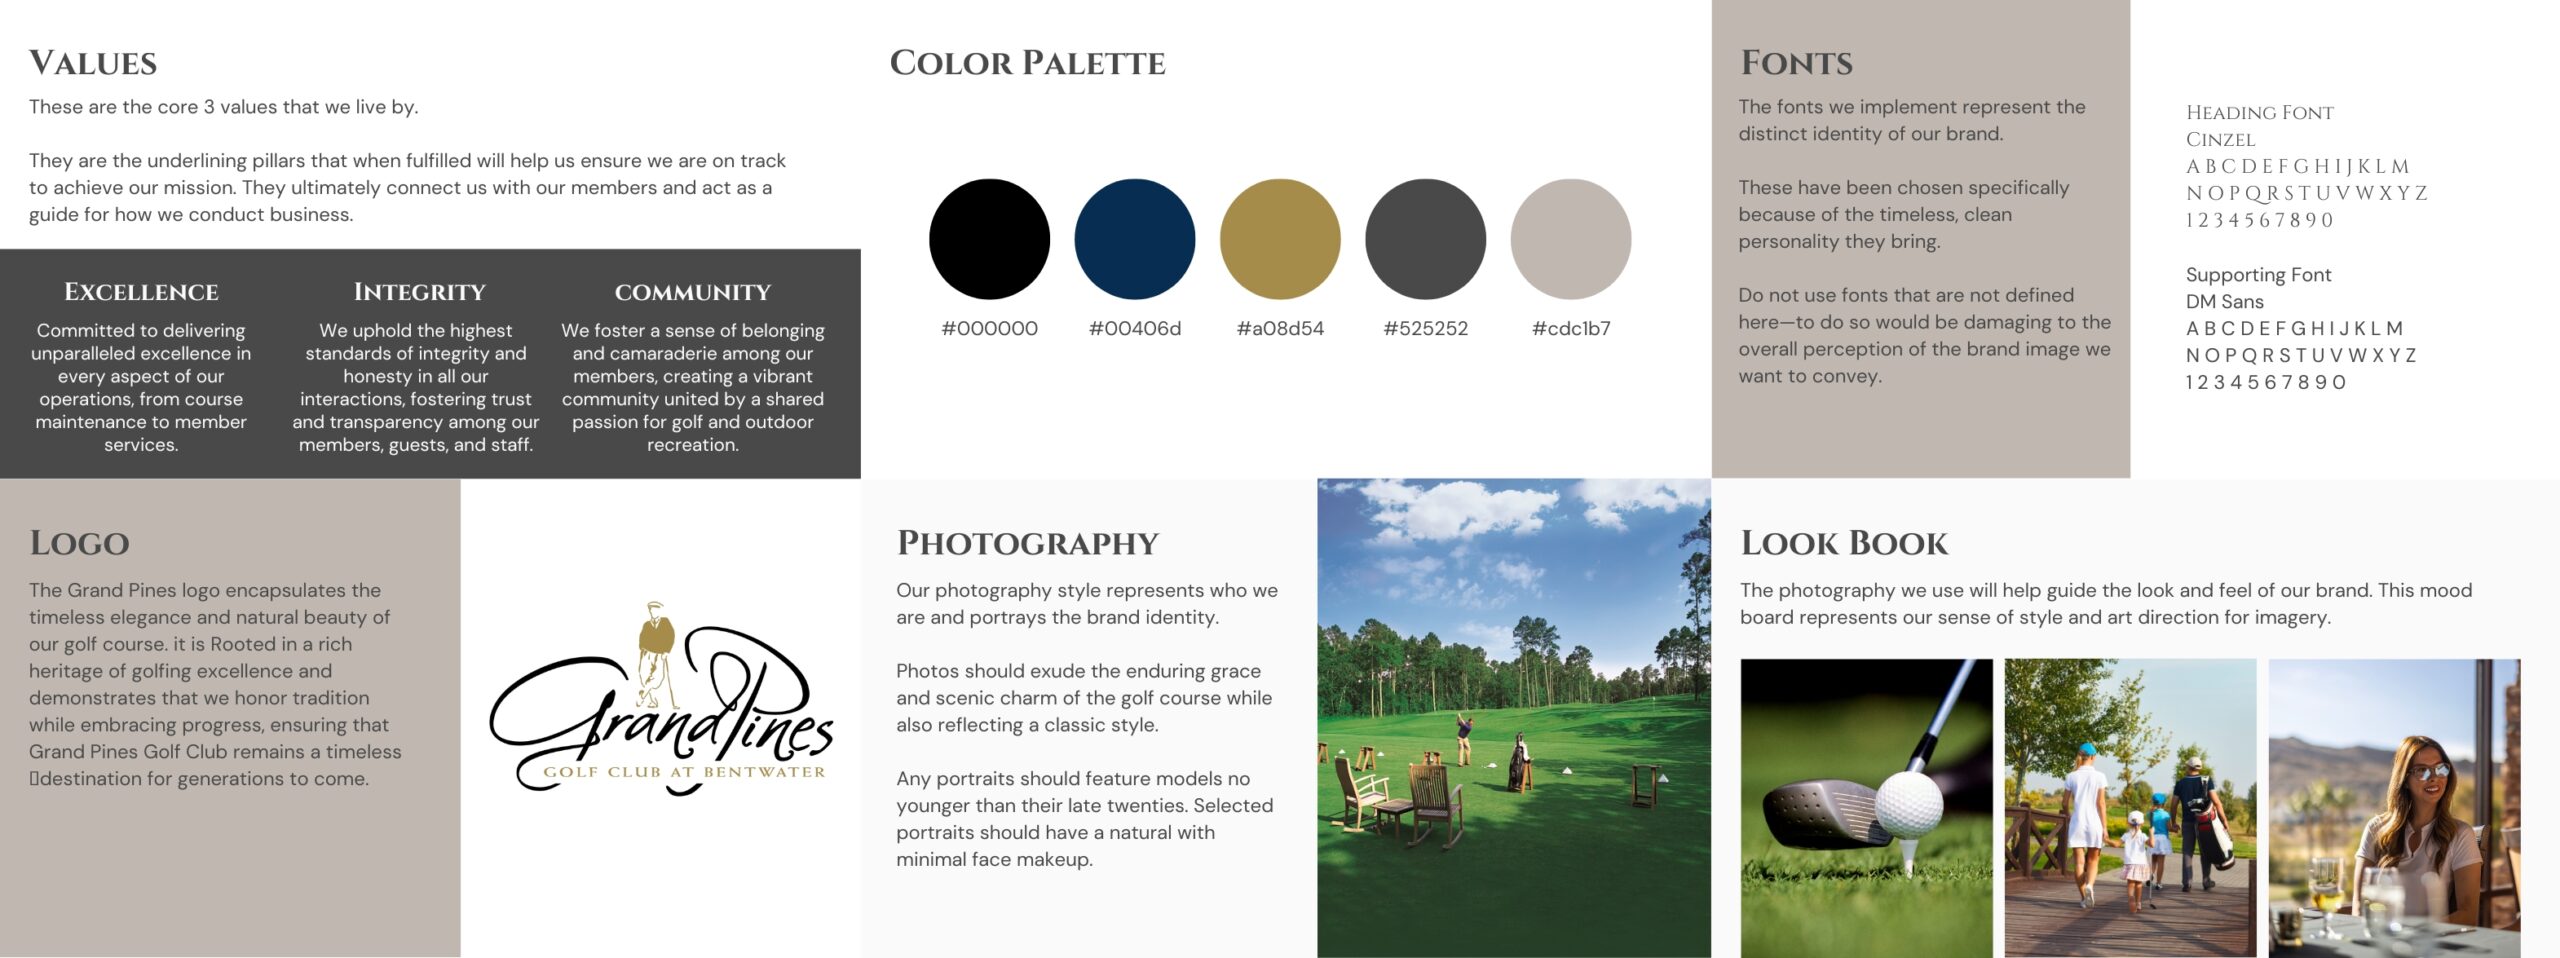 Grand Pine Brand Guidelines